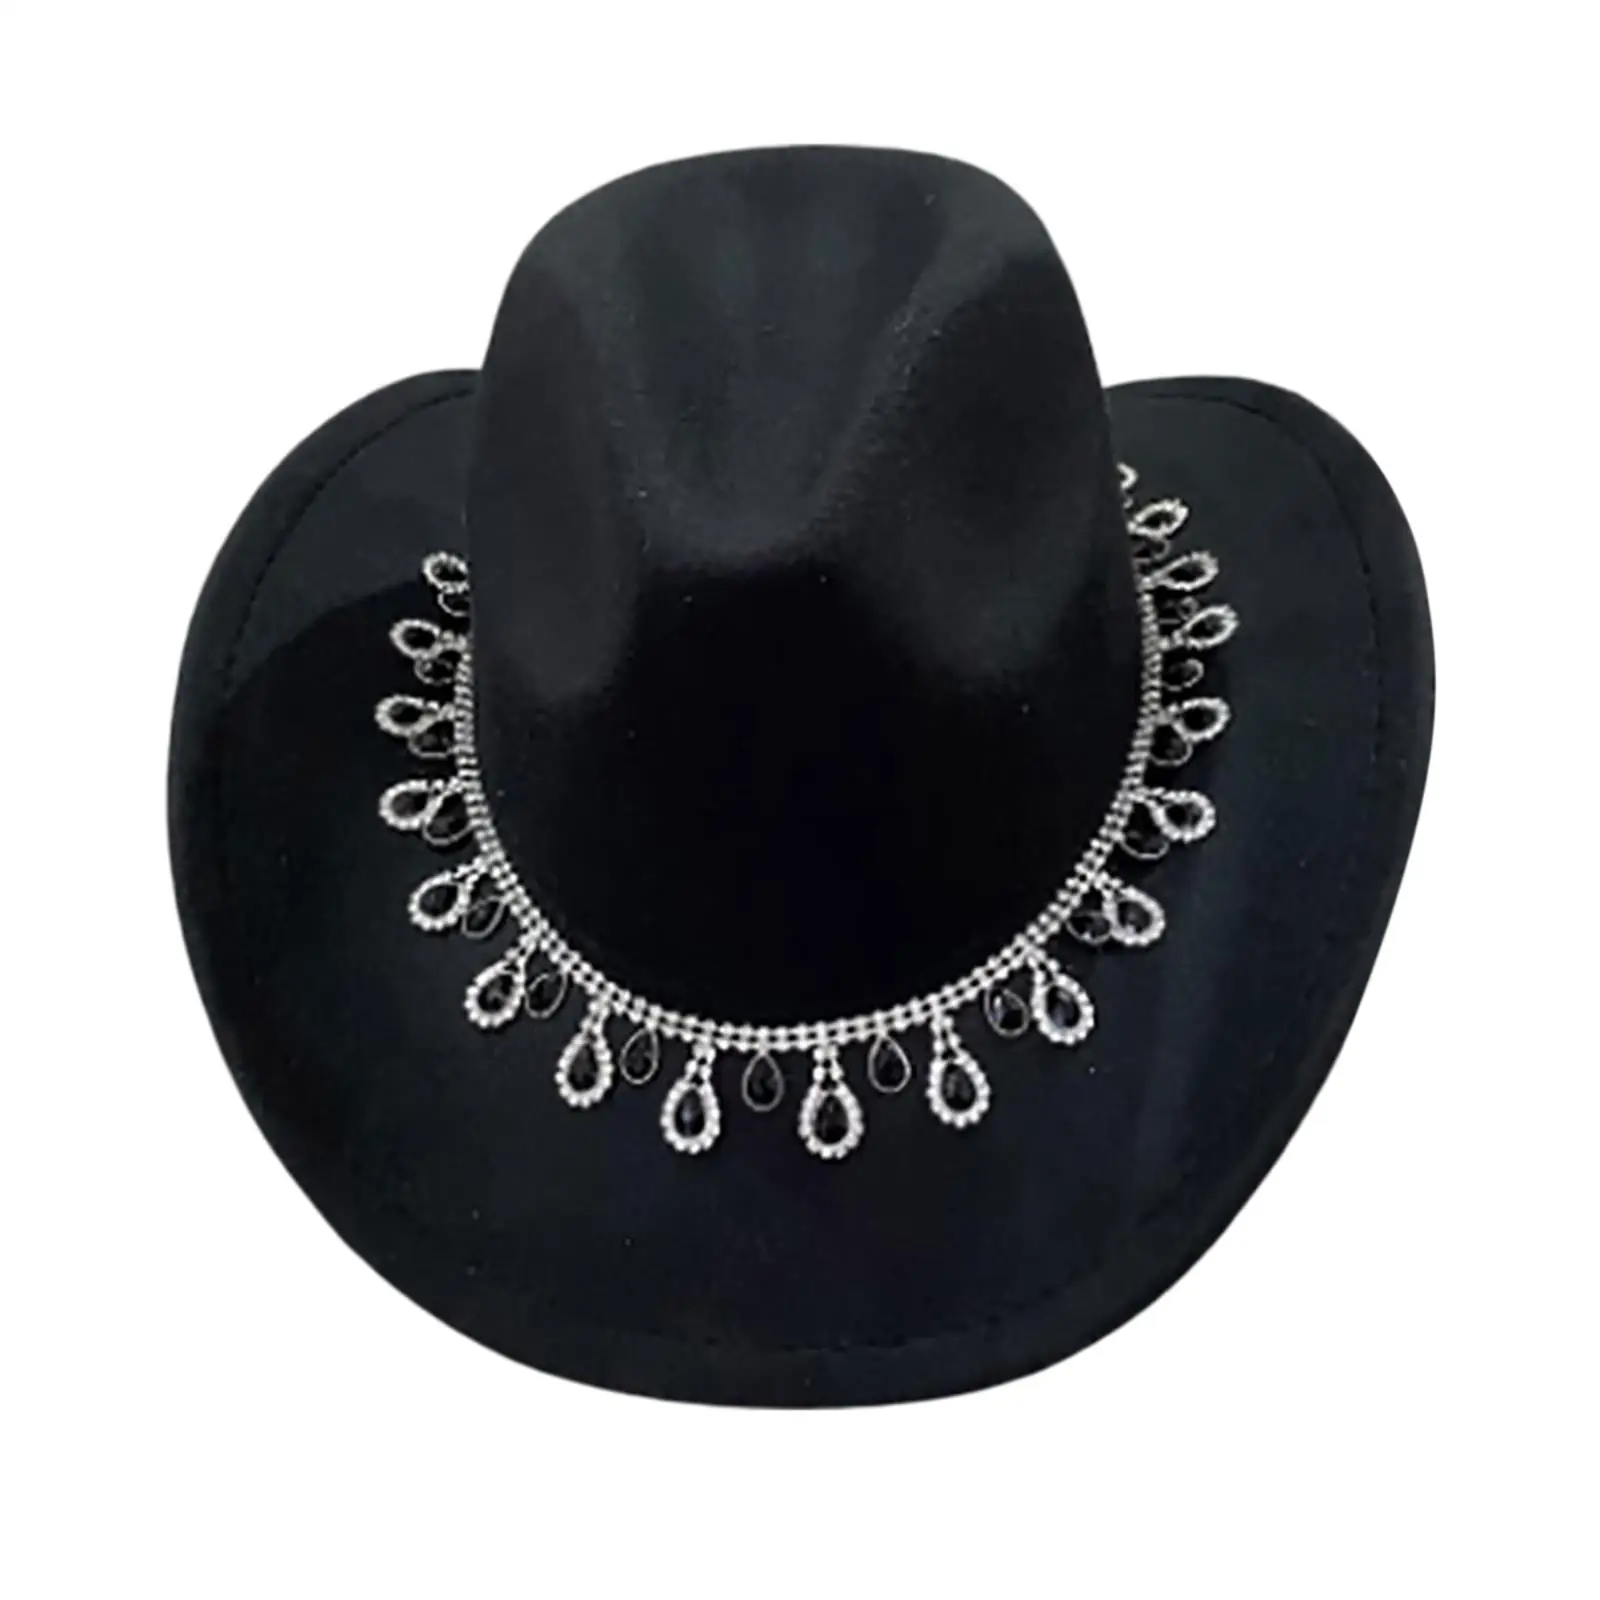 Classic Western Cowboy Hat Props Costume Accessories Wide Brim Cosplay for Unisex Teens Fishing Beach Dress up